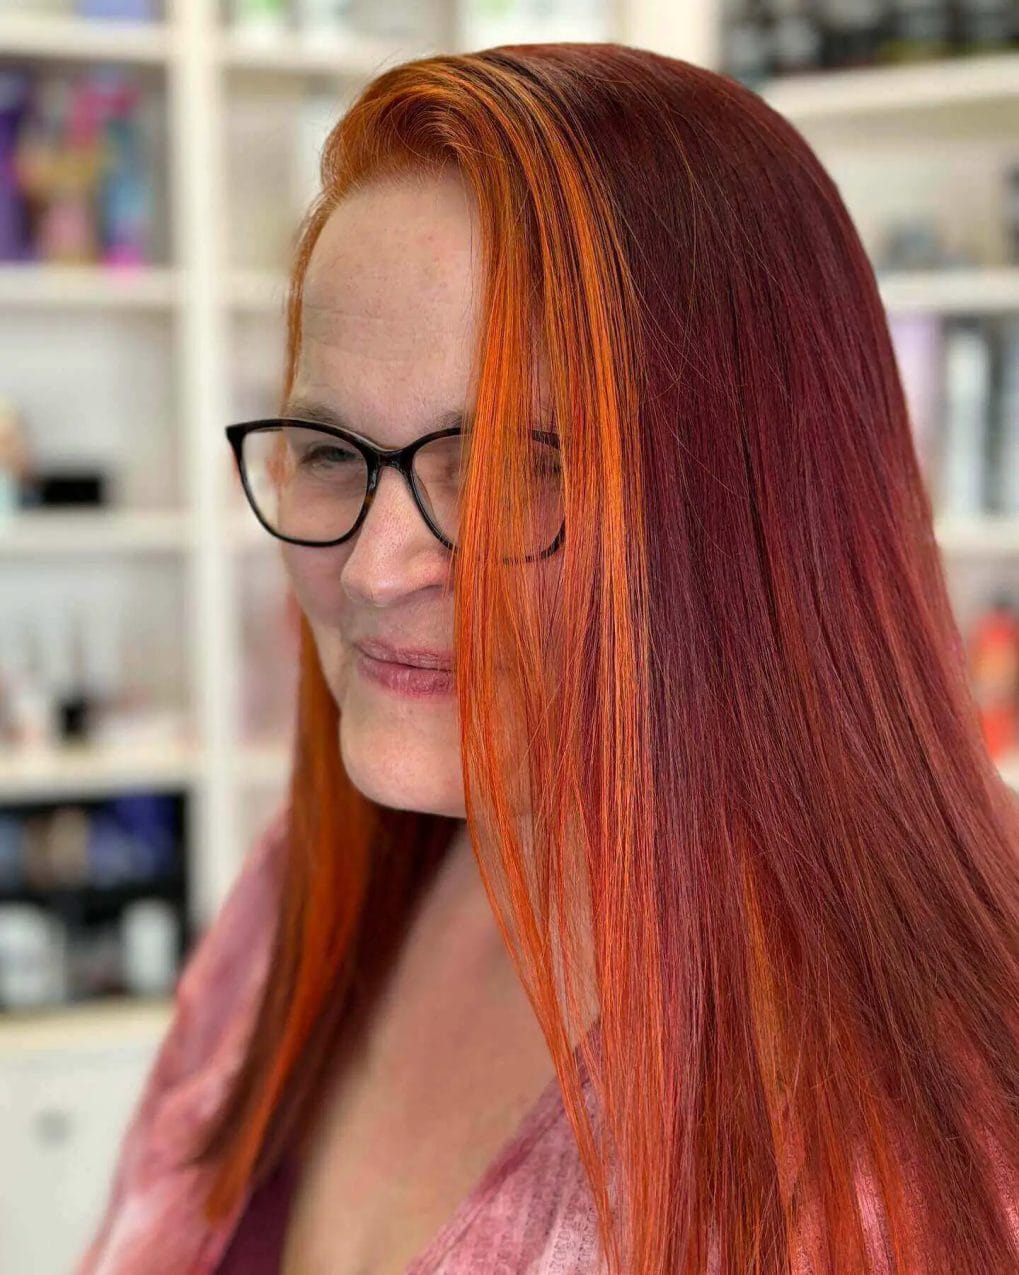 Sleek red hair with vibrant copper money pieces